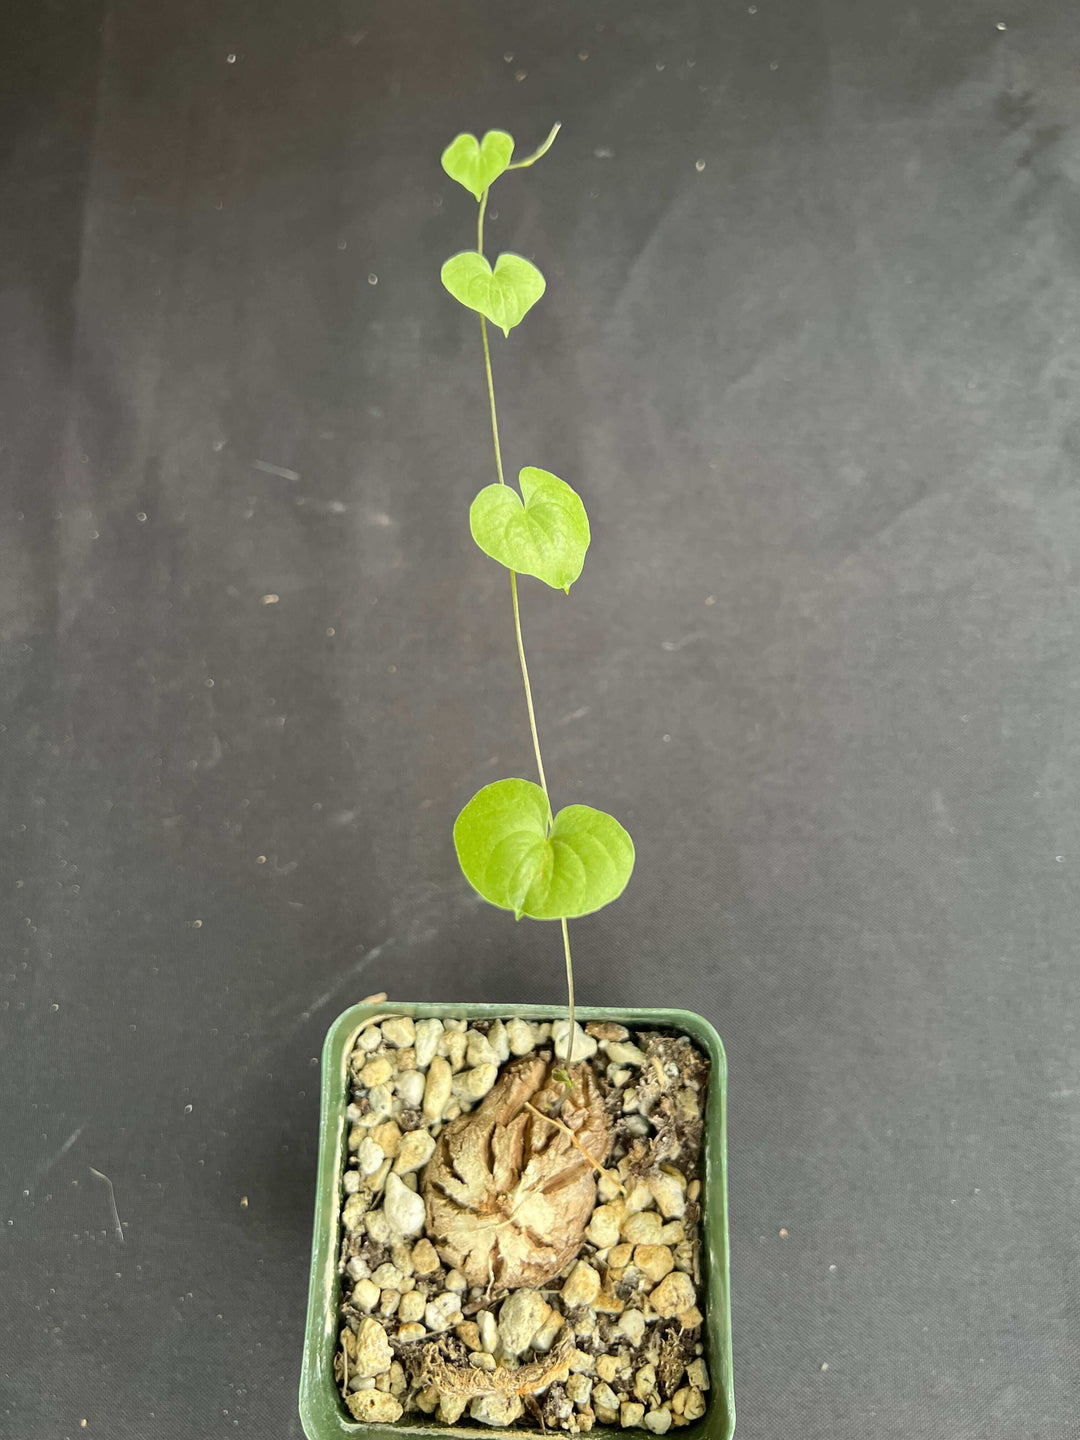 Full view of Dioscorea elephantipes, also known as Elephant's Foot Vine, in a 4-inch nursery pot, showcasing its unique caudex and vining leaves.